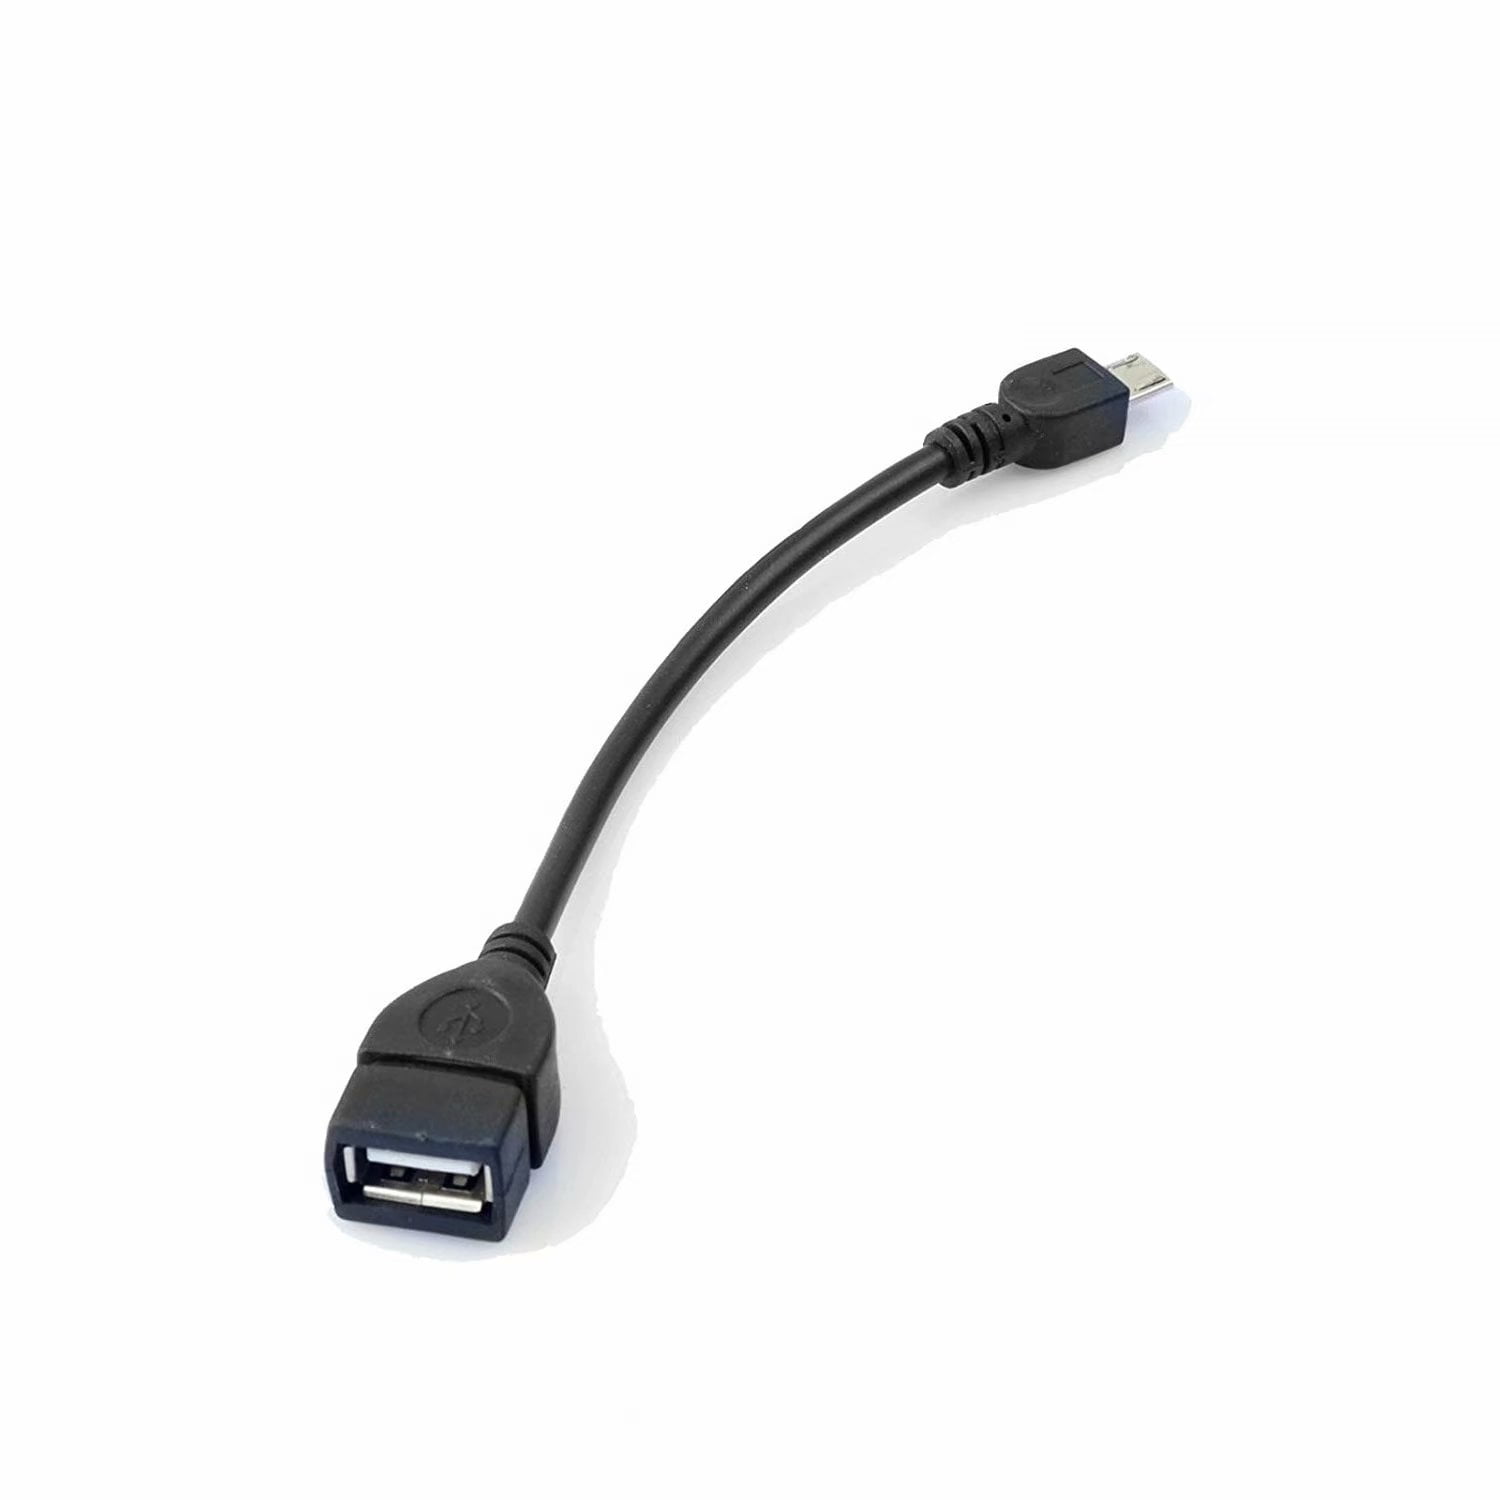 PRO OTG Cable Works for HTC One S9 Right Angle Cable Connects You to Any Compatible USB Device with MicroUSB 